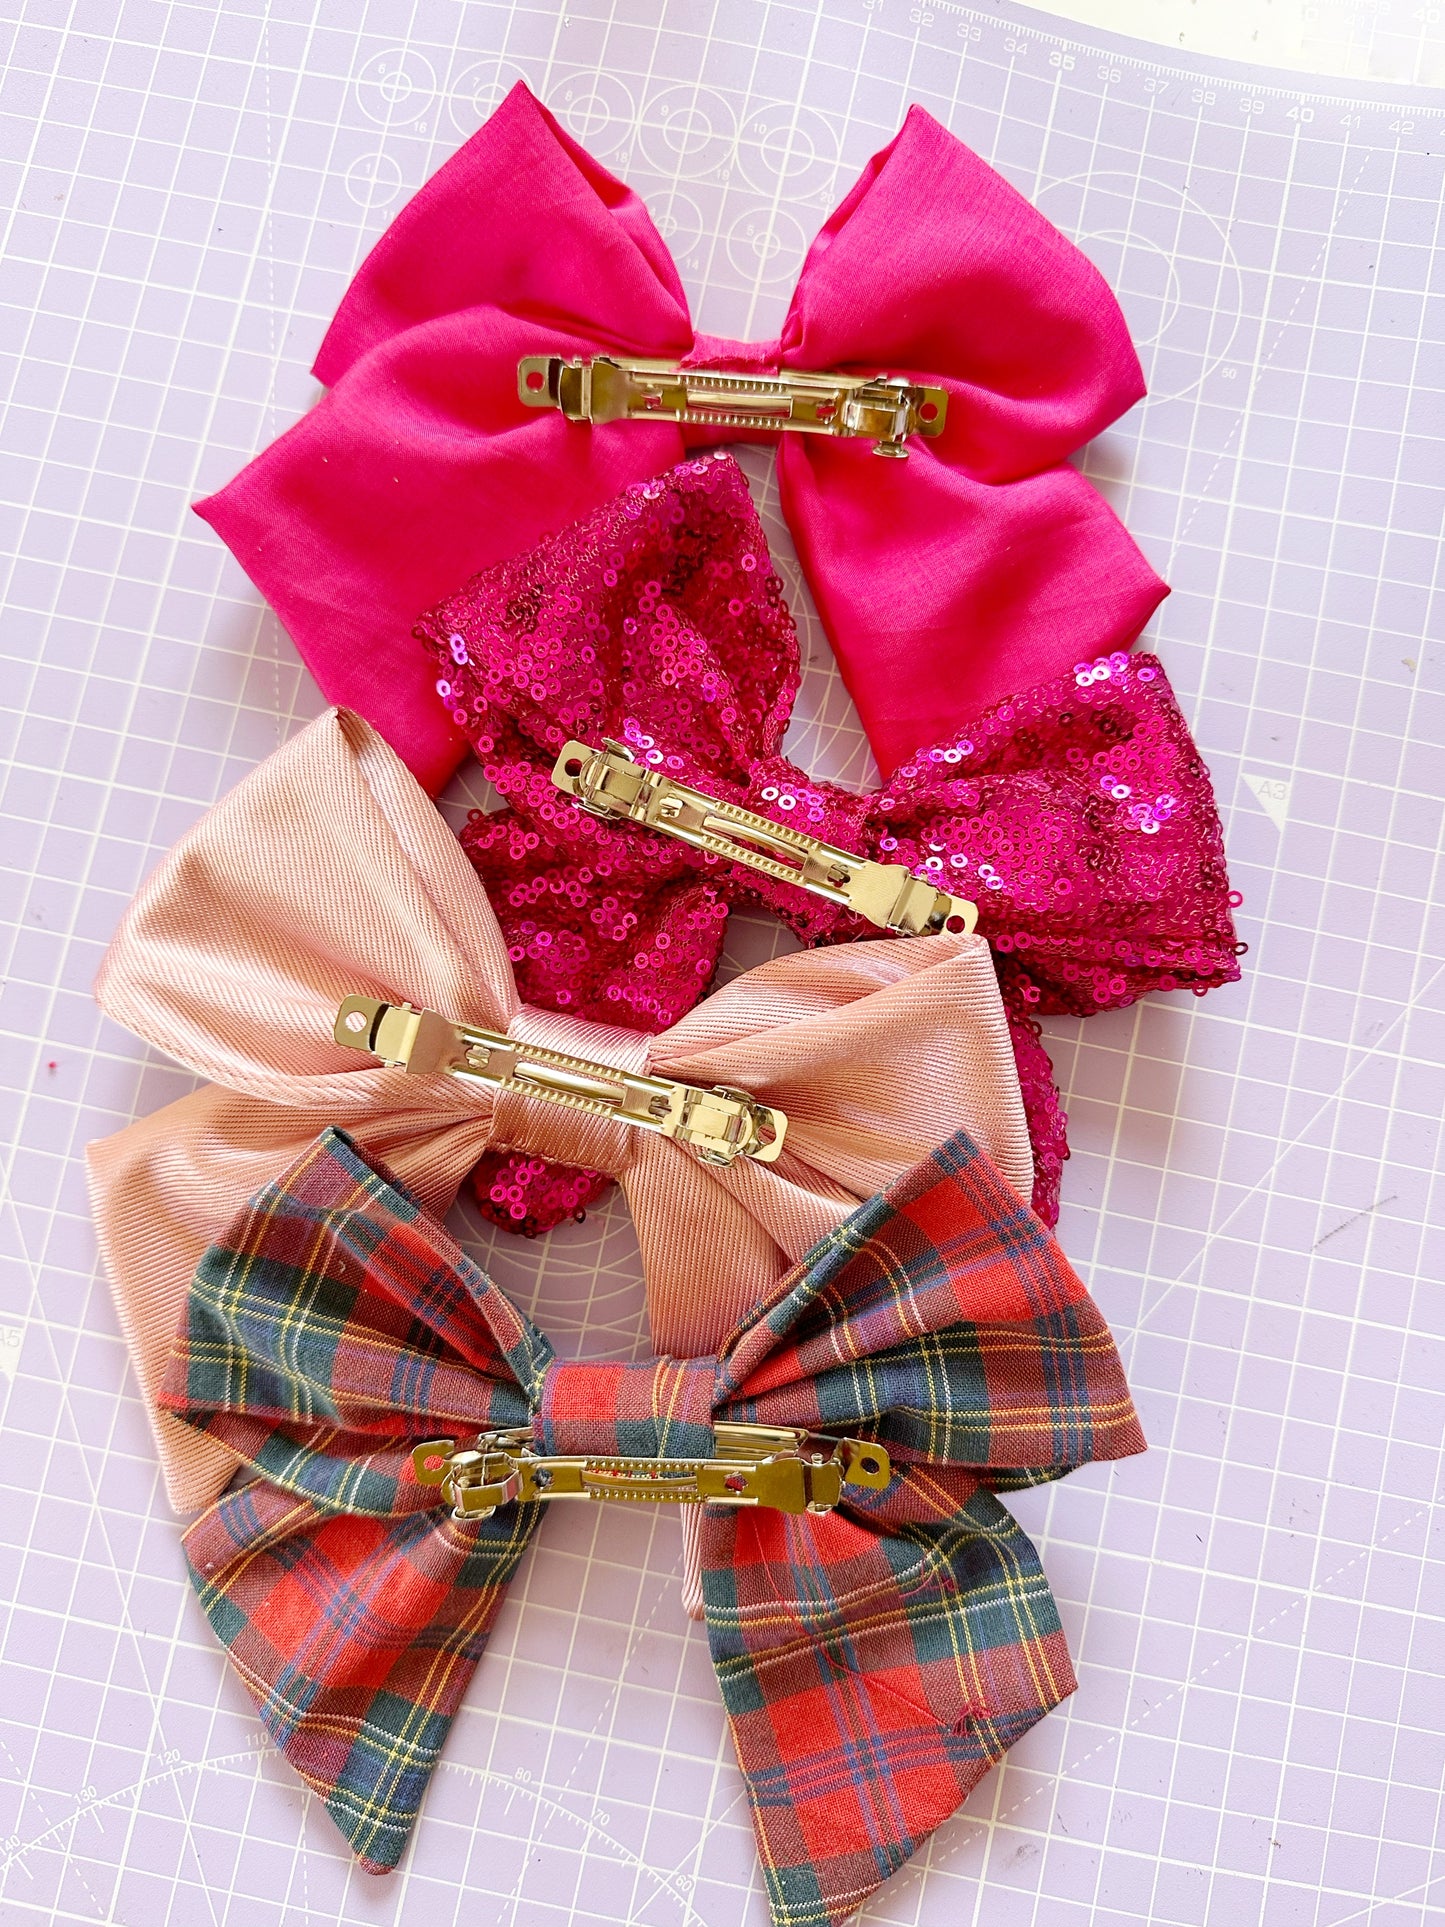 Hair Bow in pink shimmer